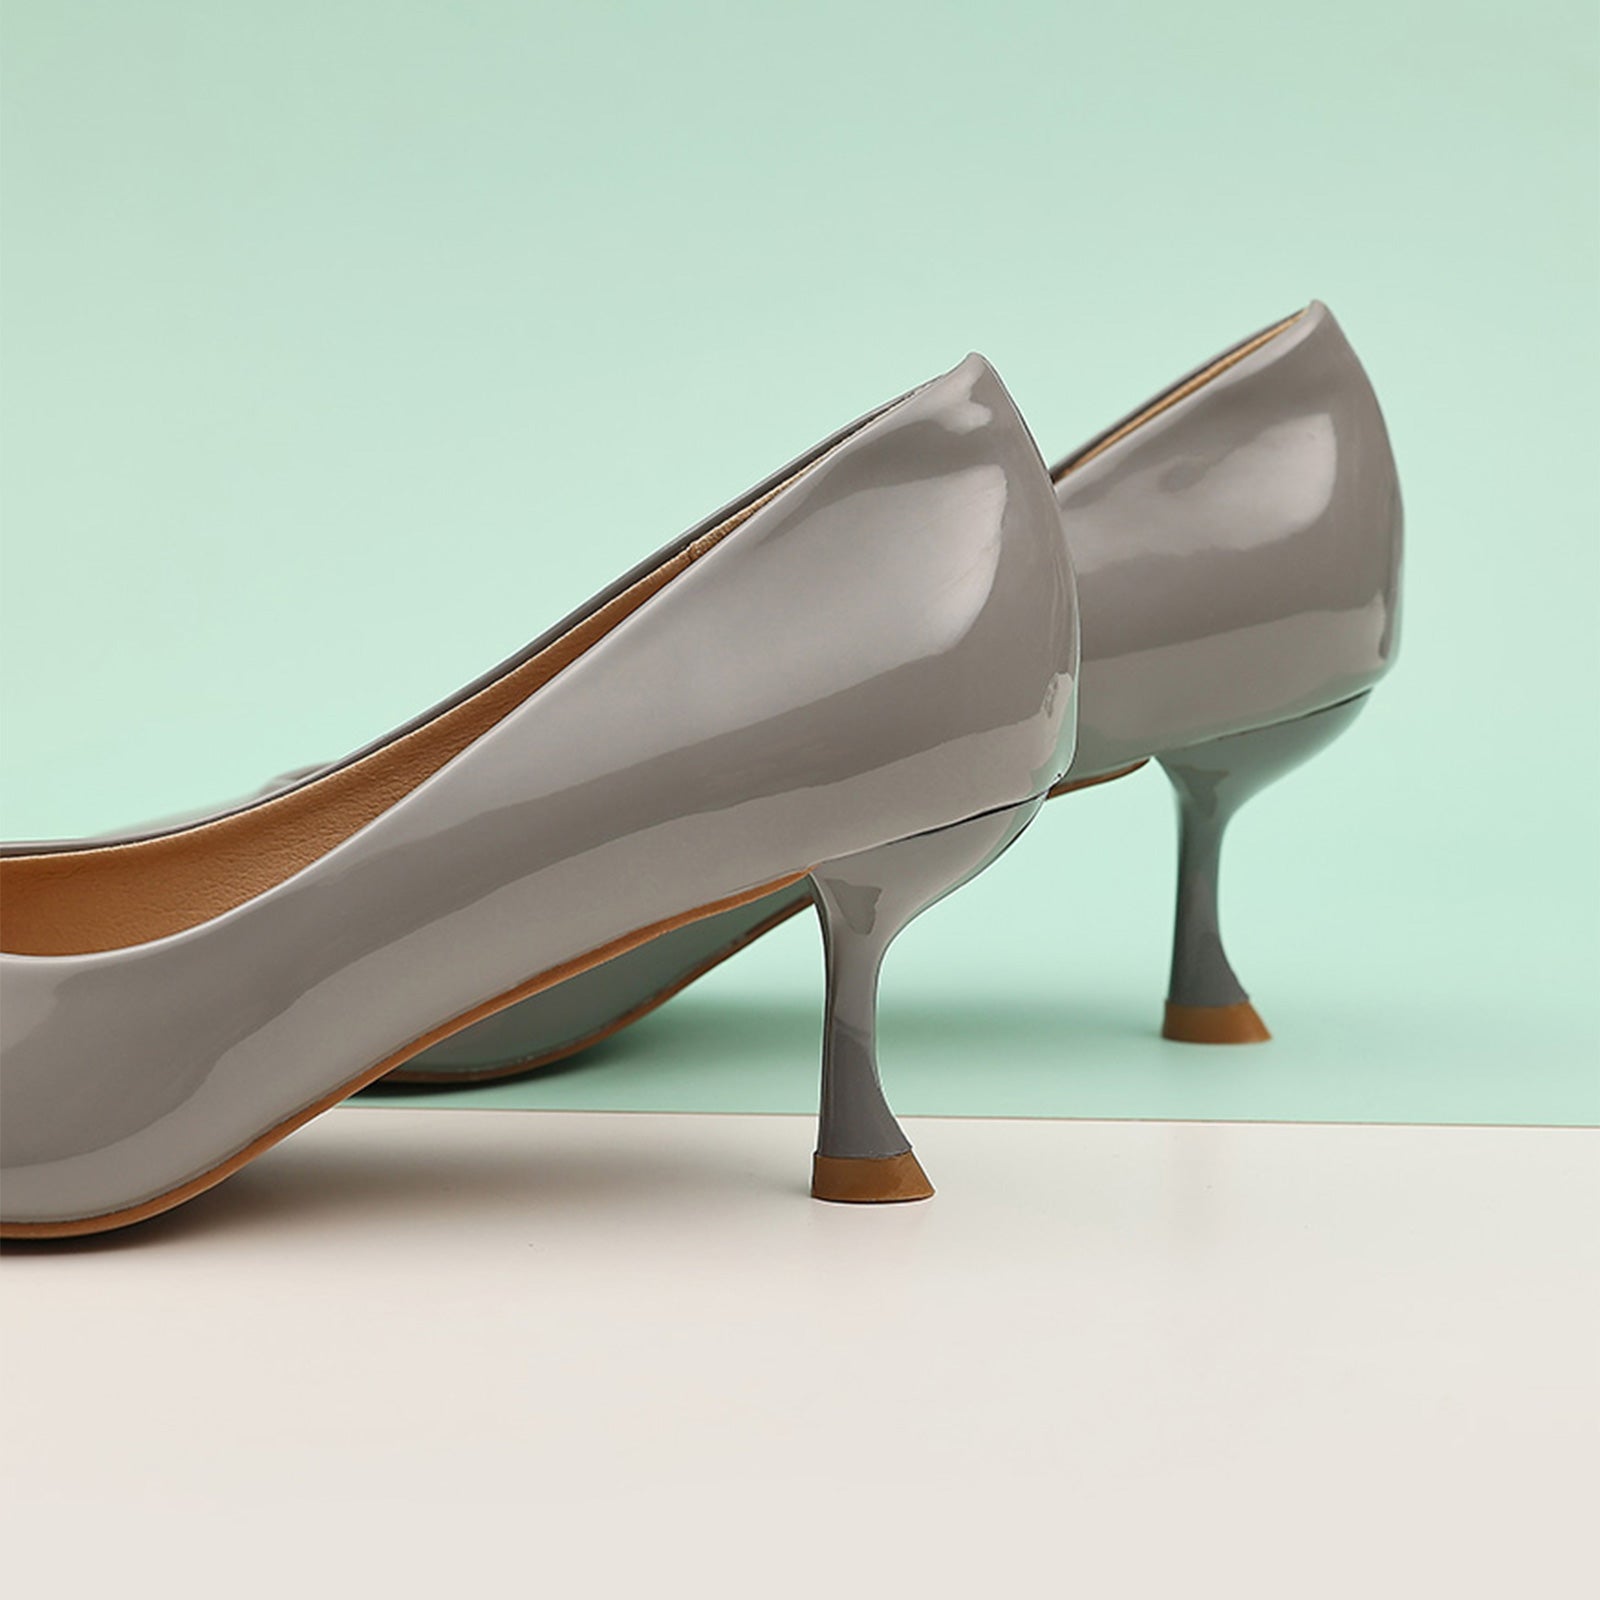 Grey Patent Leather Pumps with a glossy finish, a classic and refined option for any occasion